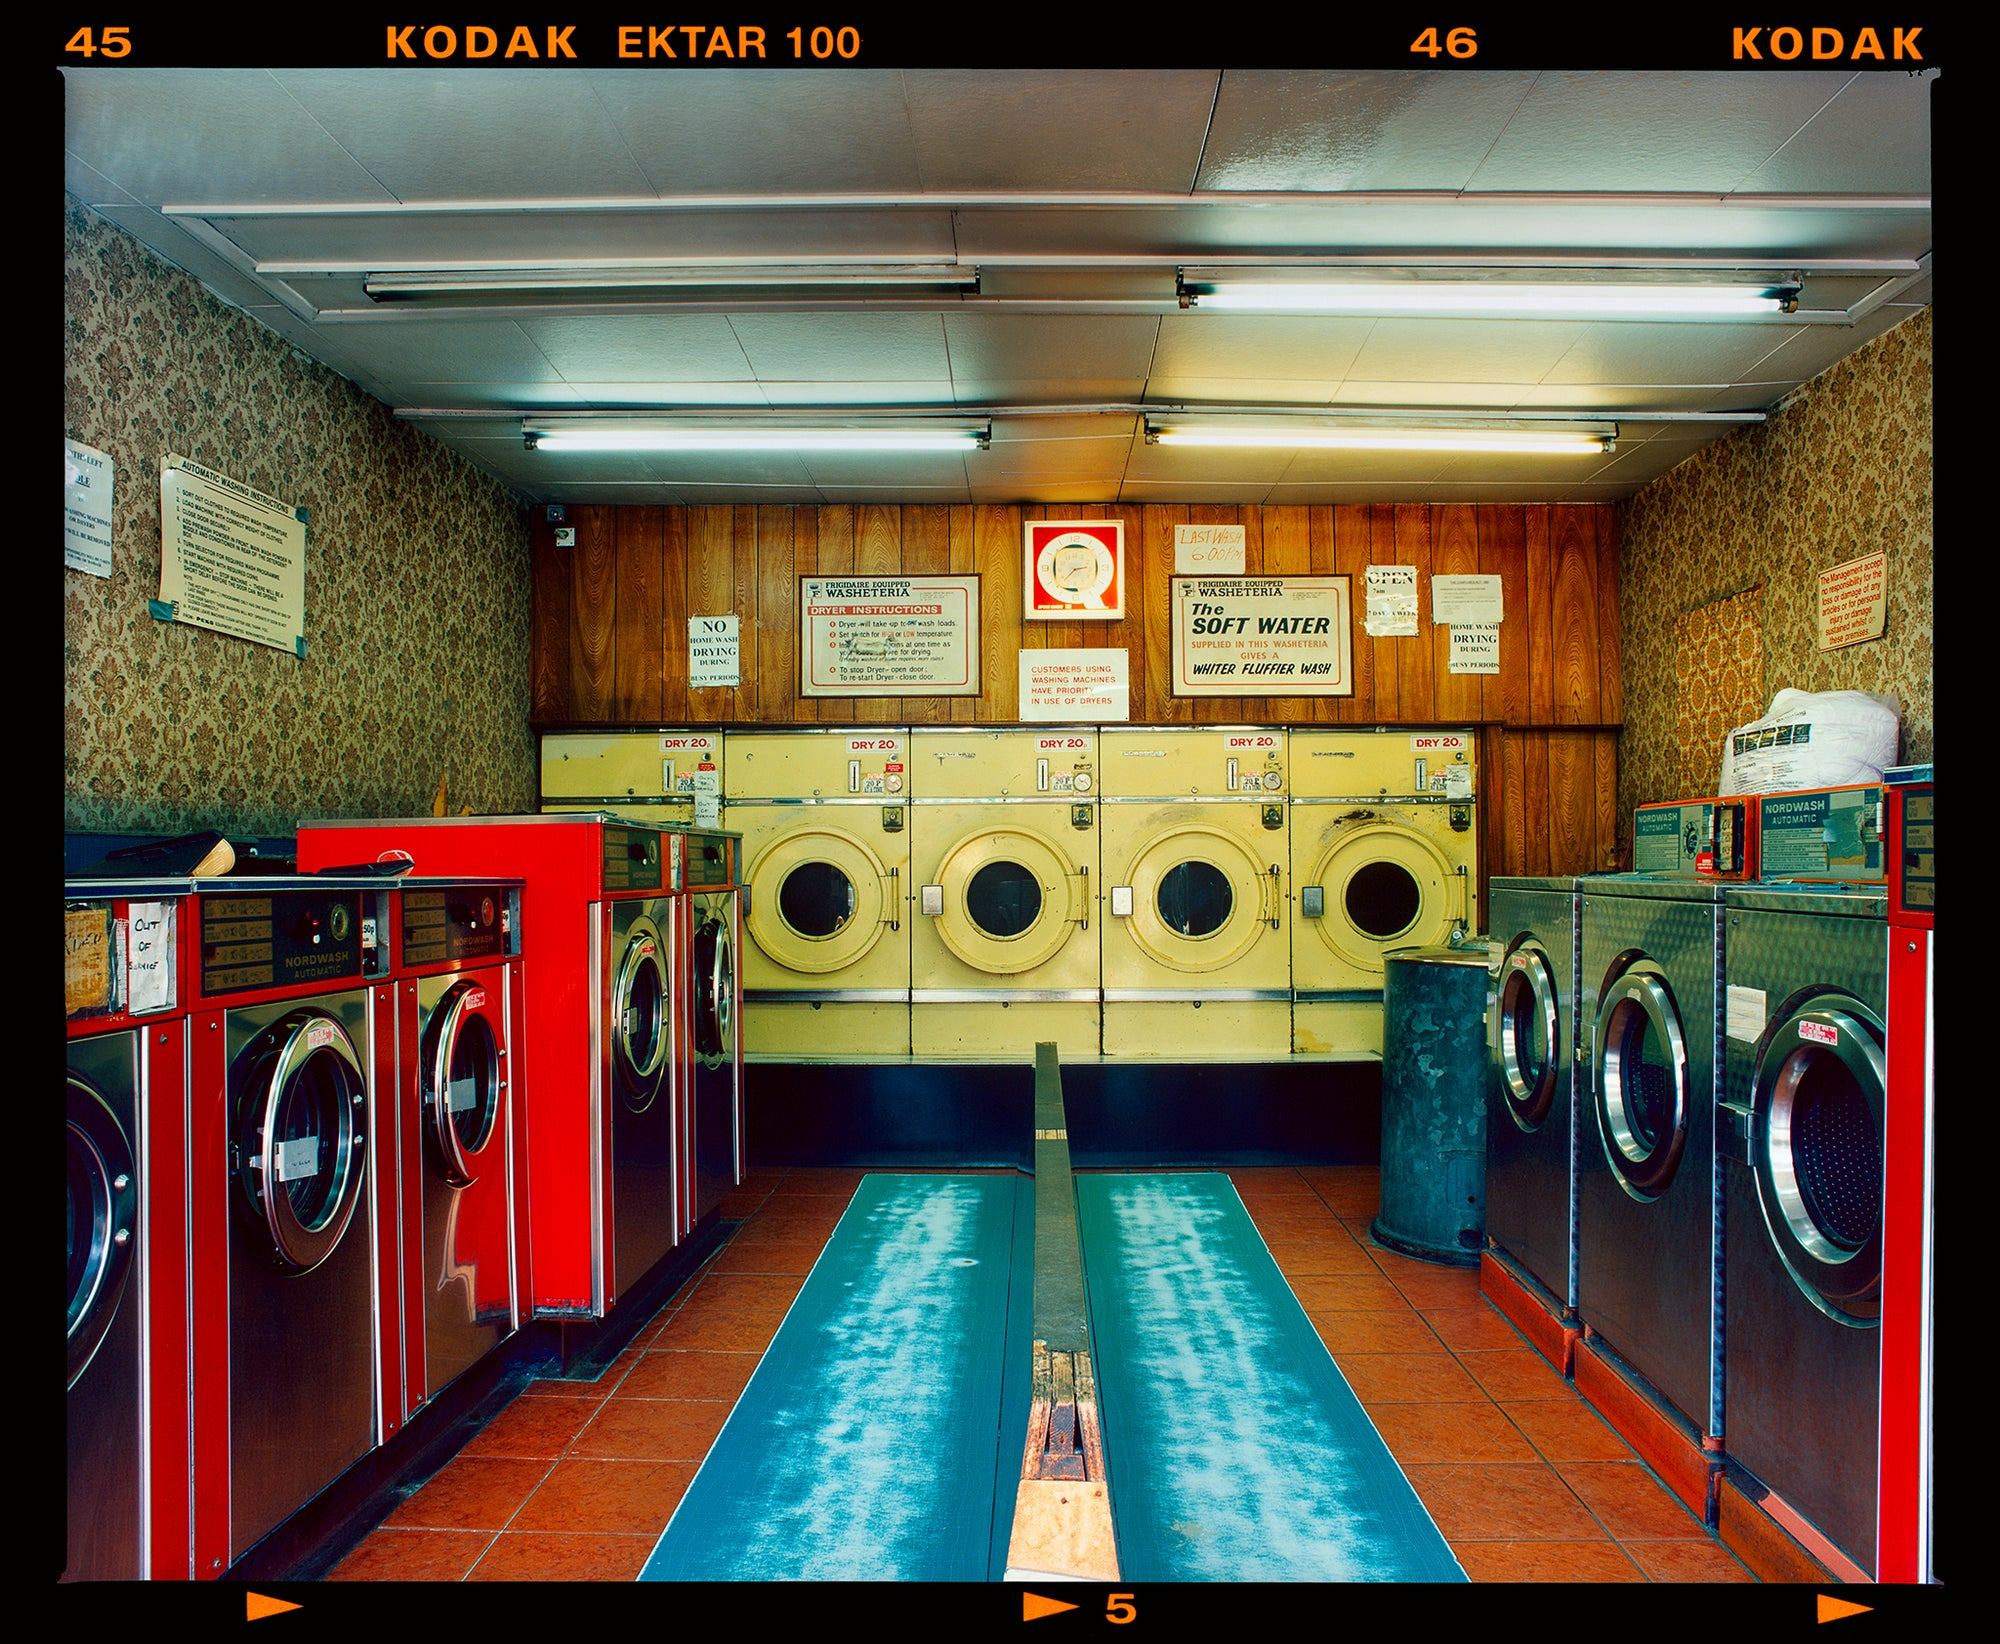 Photograph by Richard Heeps. A laundrette with washing machines on each wall and a double sided seat in the middle.